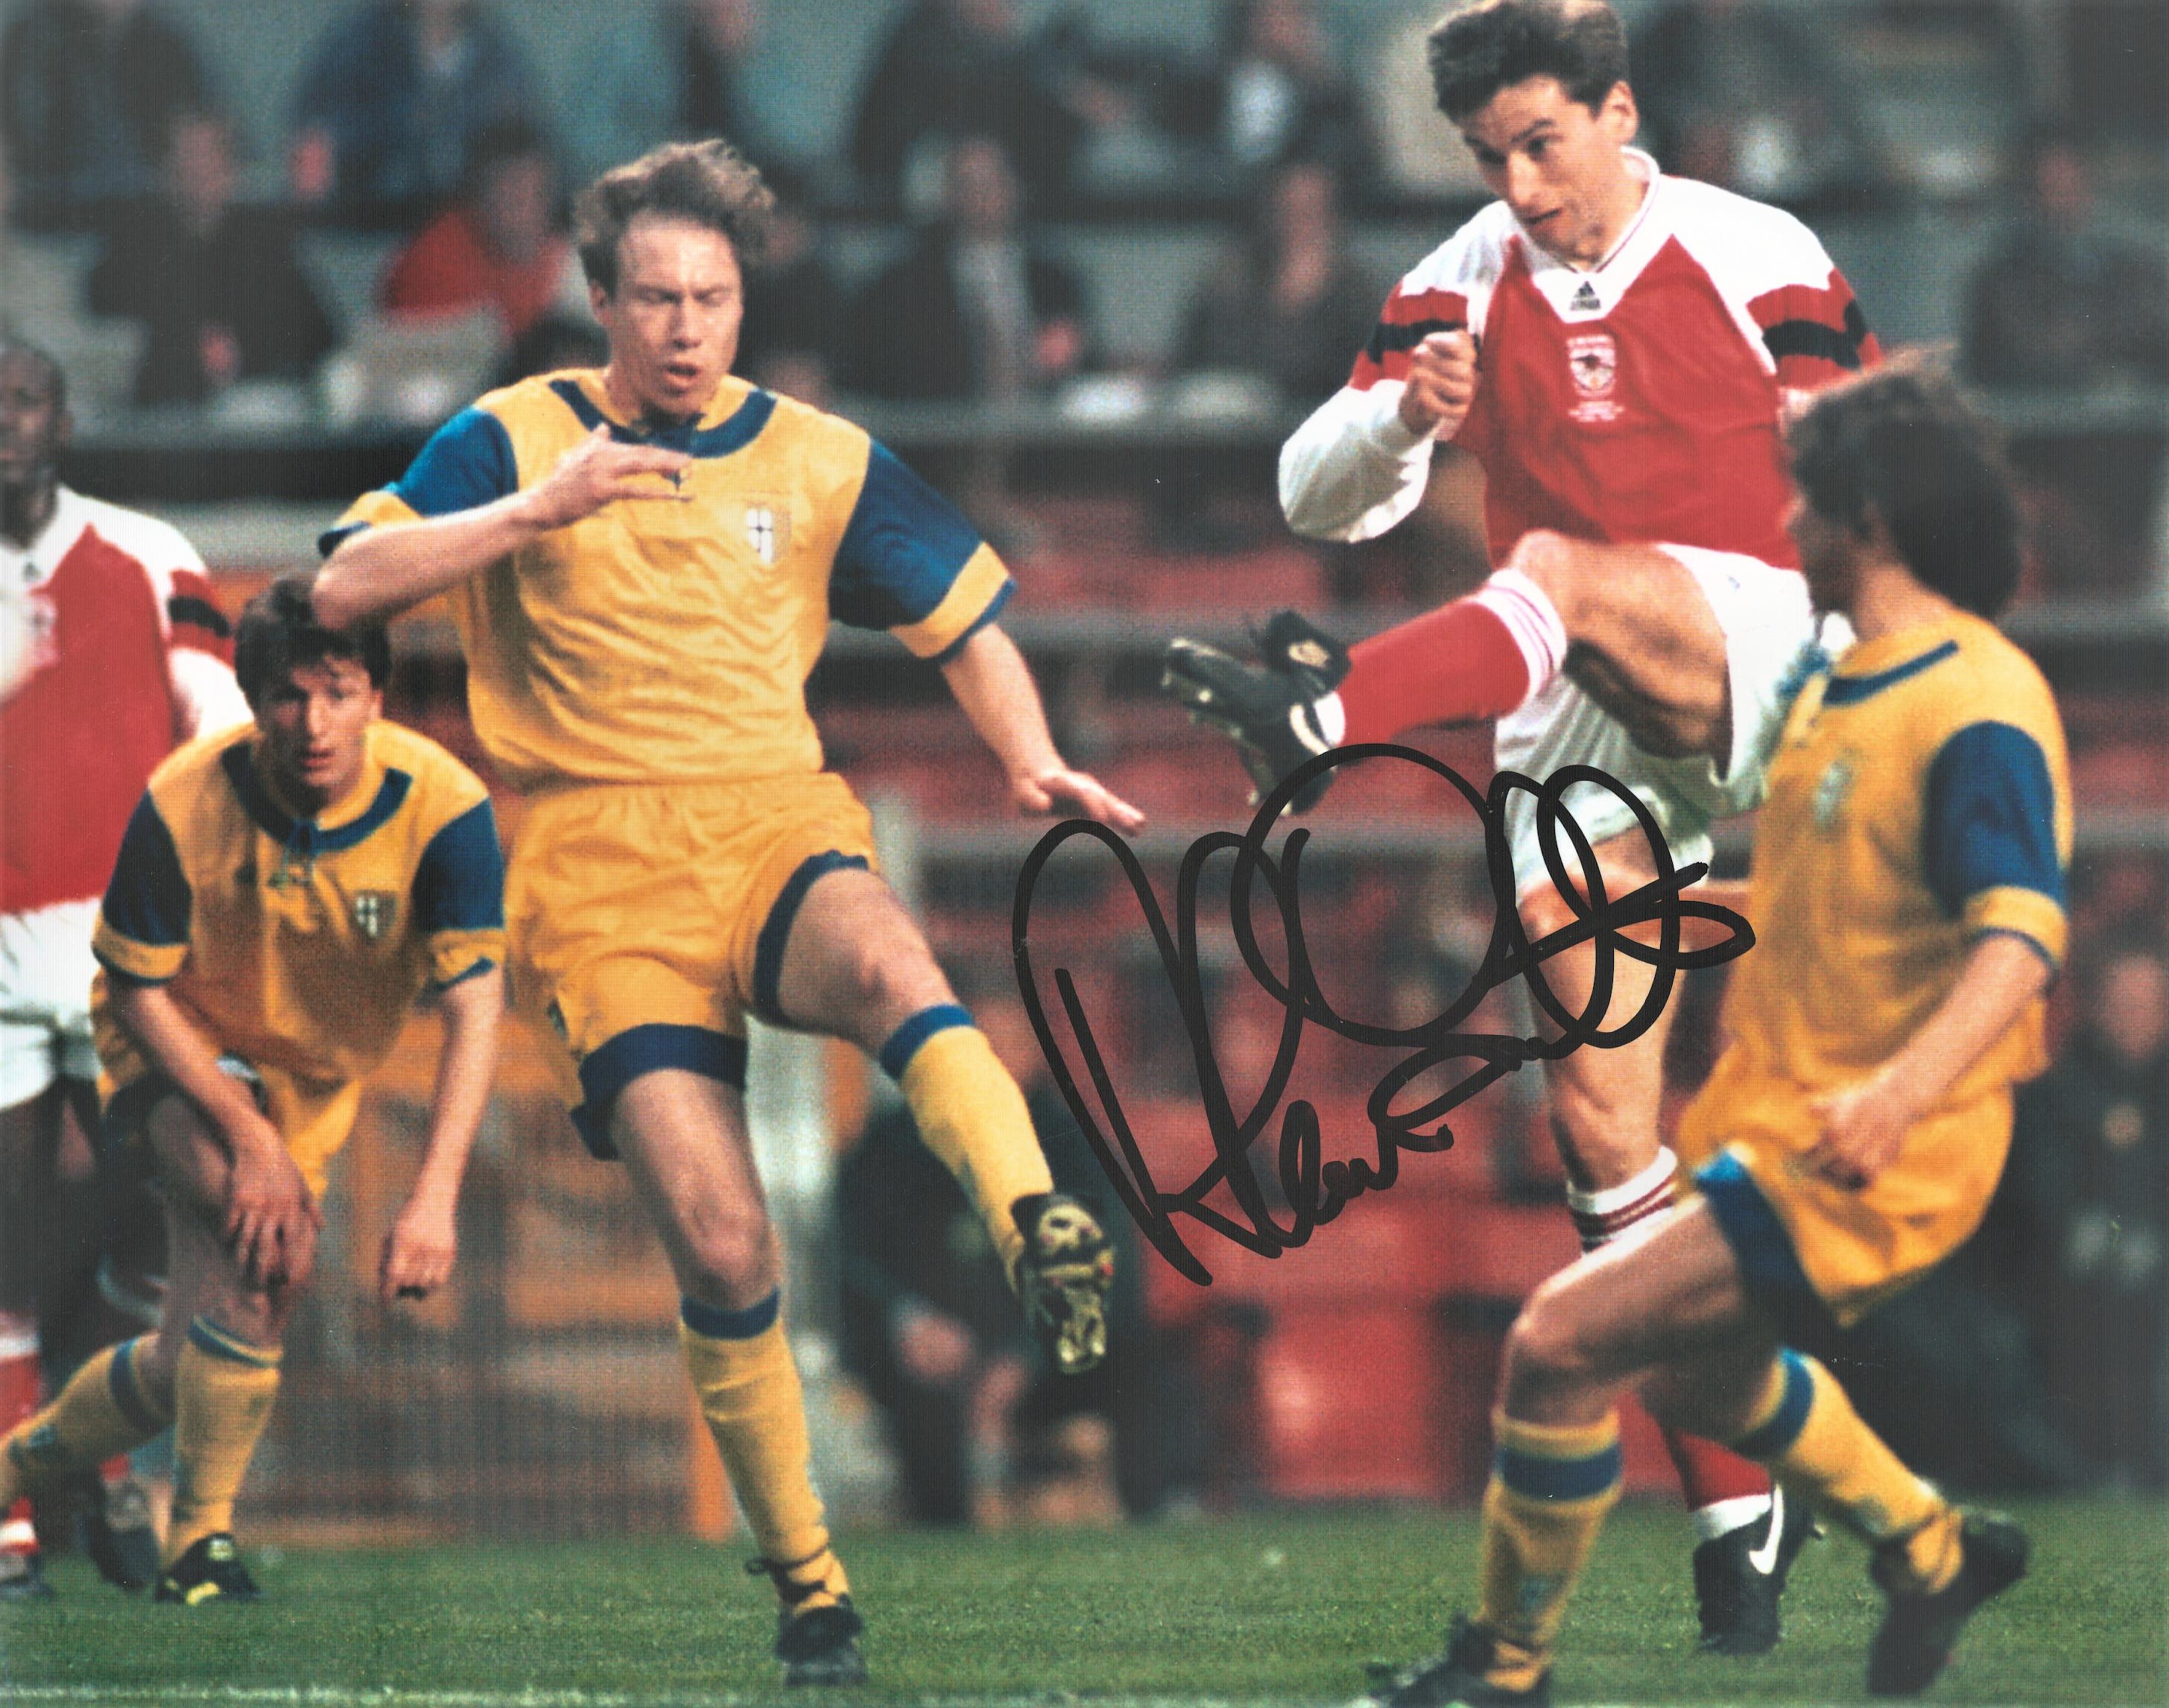 Arsenal FC Alan Smith Hand signed 10x8 Colour Photo. Photo shows Smith taking a shot against an